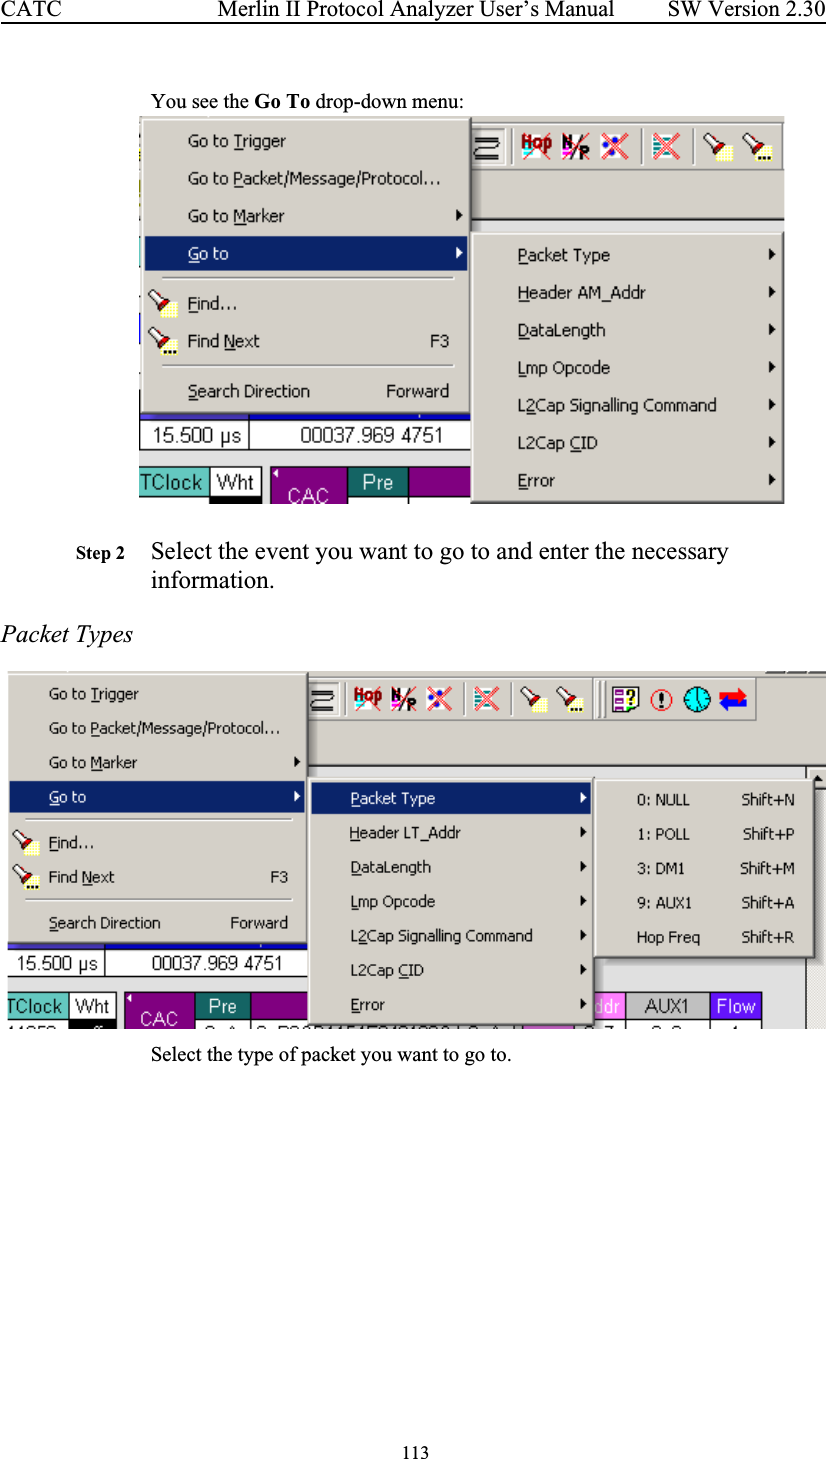  113 Merlin II Protocol Analyzer User’s ManualCATC SW Version 2.30You see the Go To drop-down menu:Step 2 Select the event you want to go to and enter the necessary information.Packet TypesSelect the type of packet you want to go to.